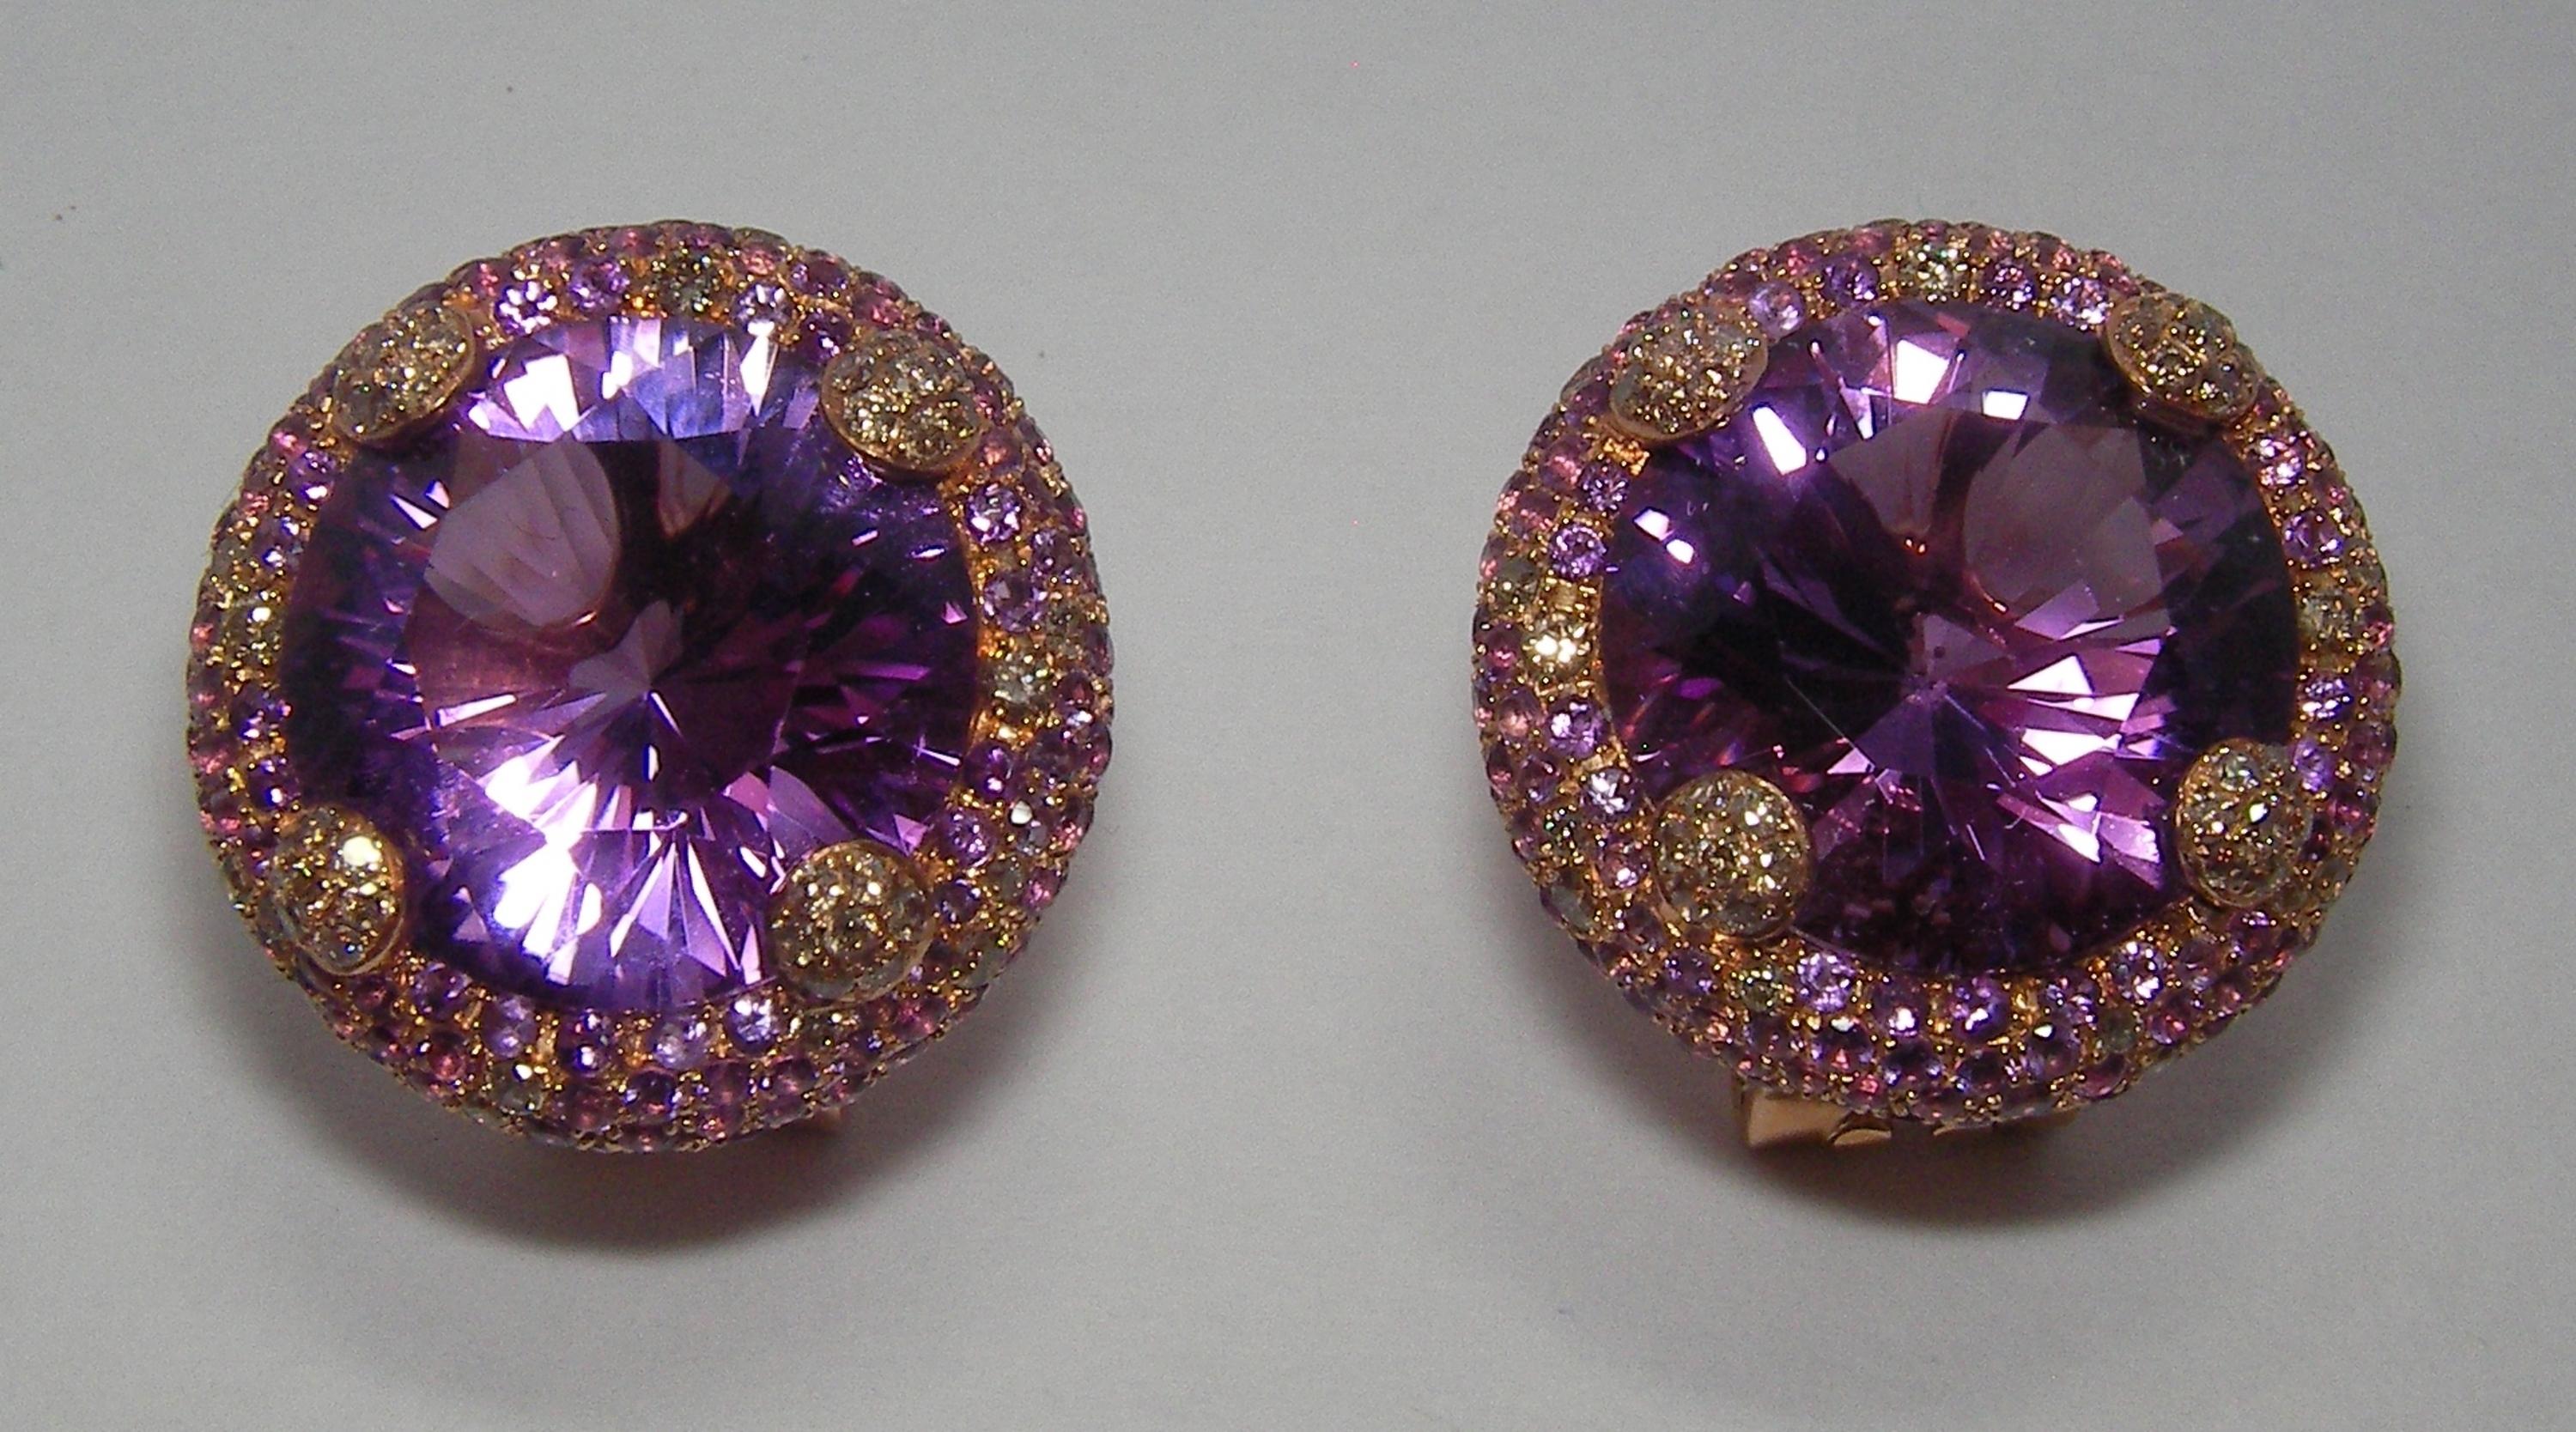 These 18 Karat Rose Gold Earrings are embellished with elegant Cognac colored Diamonds and Amethyst. A dazzling 8.8 Carat round cut Amethyst serves as a center stone on each earring. These is a perfect compliment to our matching Rose Gold, Diamond,